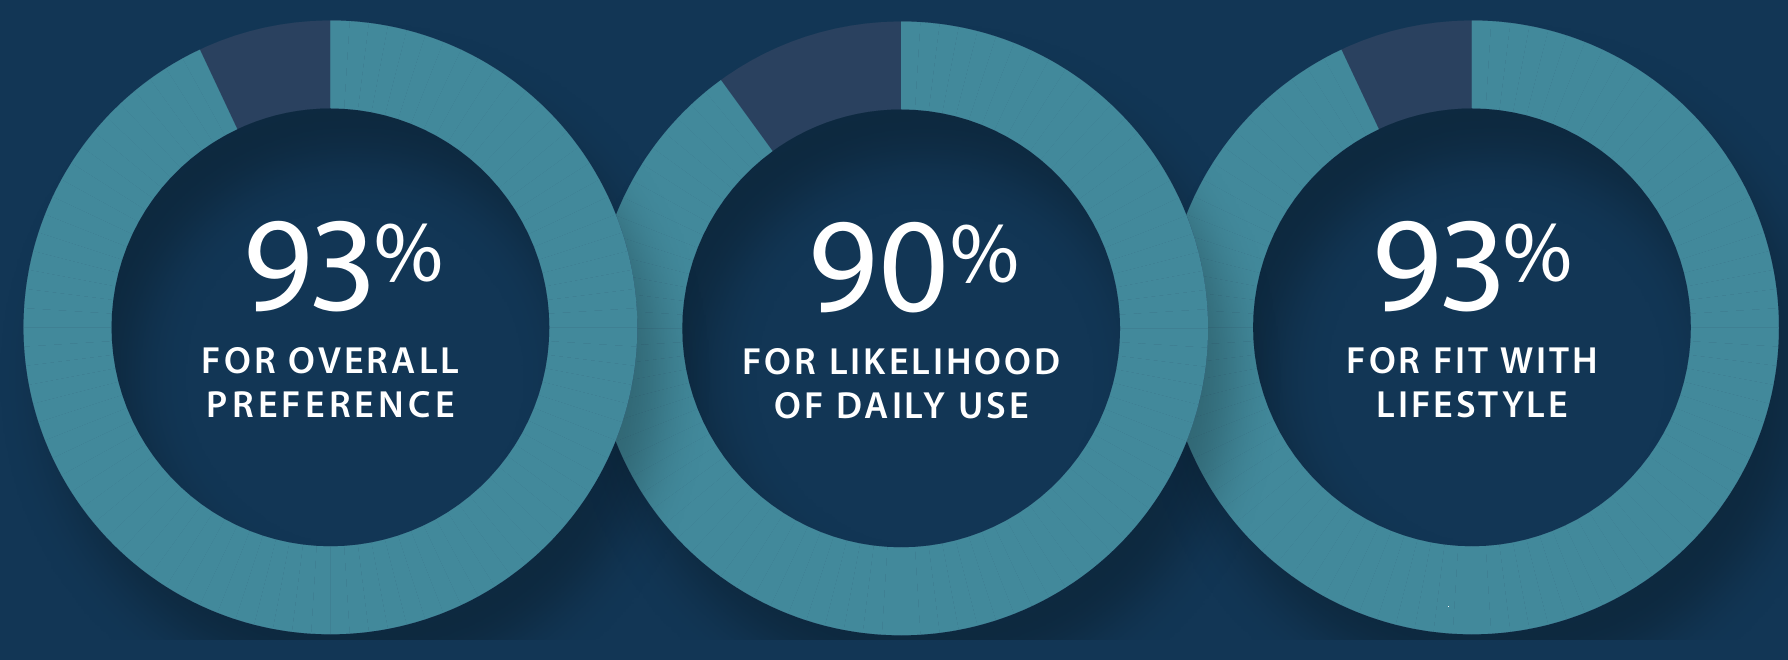 93 percent for overall preference 90 percent for likelihood of daily use 93 percent for fit with lifestyle